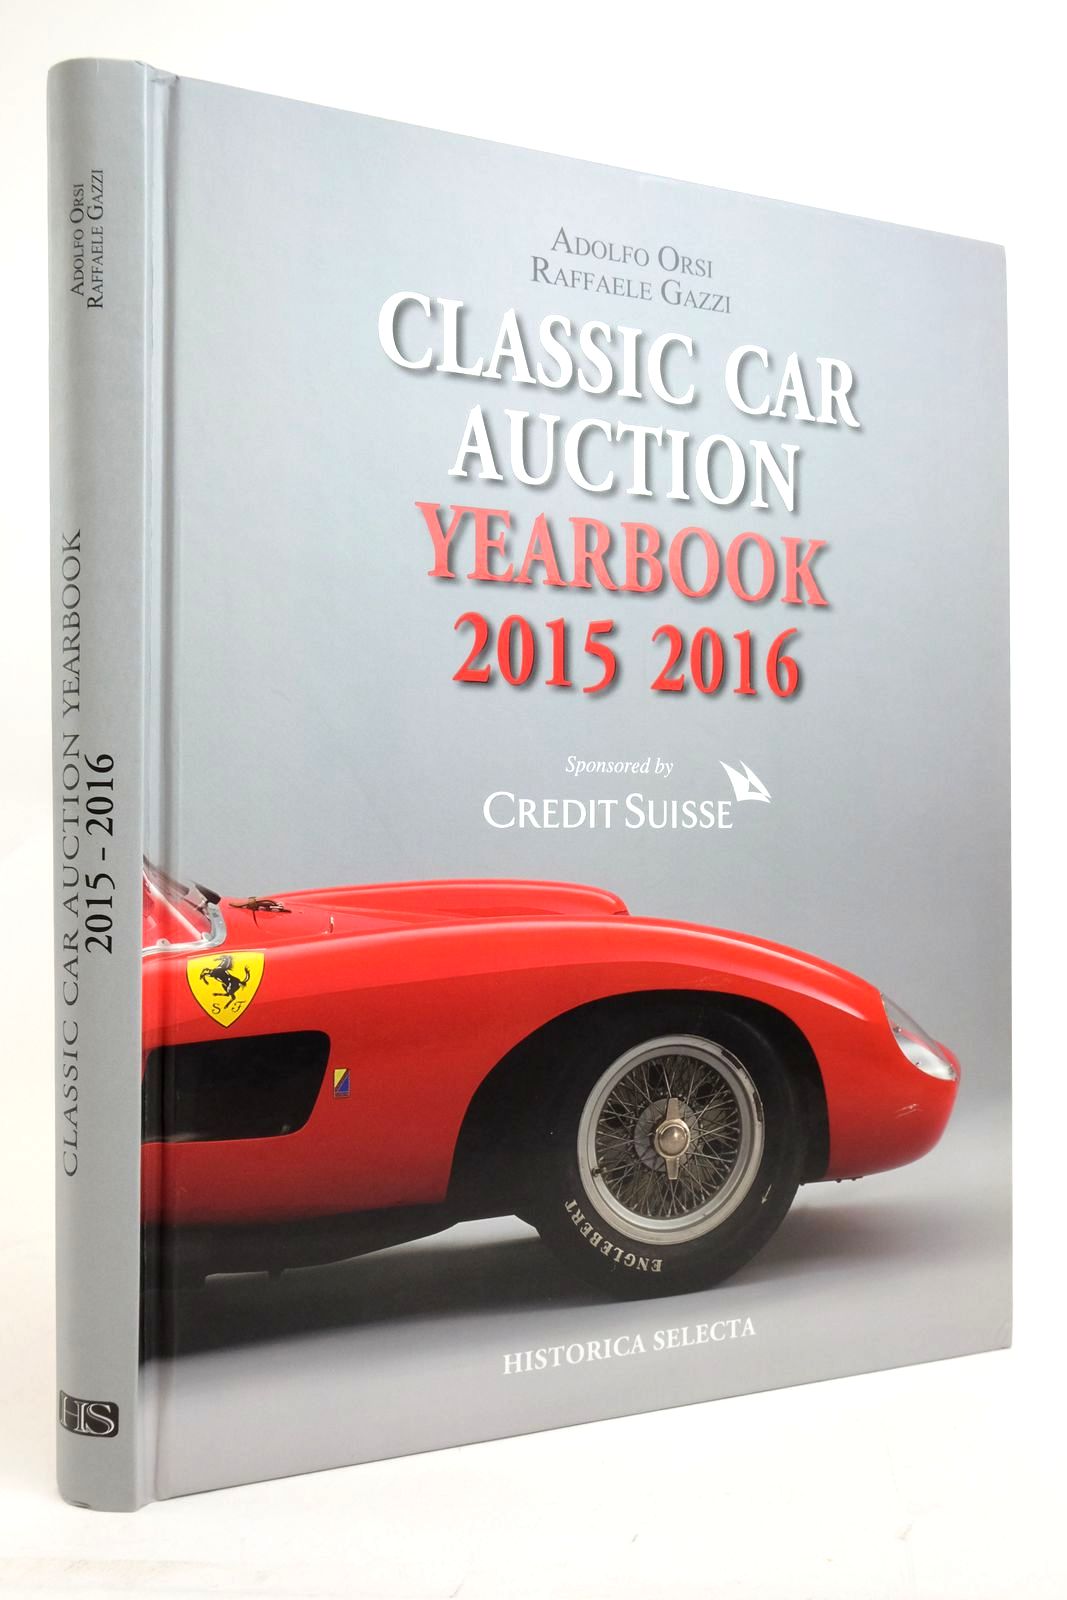 Photo of CLASSIC CAR AUCTION YEARBOOK 2015-2016 written by Orsi, Adolfo Gazzi, Raffaele published by Historica Selecta (STOCK CODE: 2136573)  for sale by Stella & Rose's Books